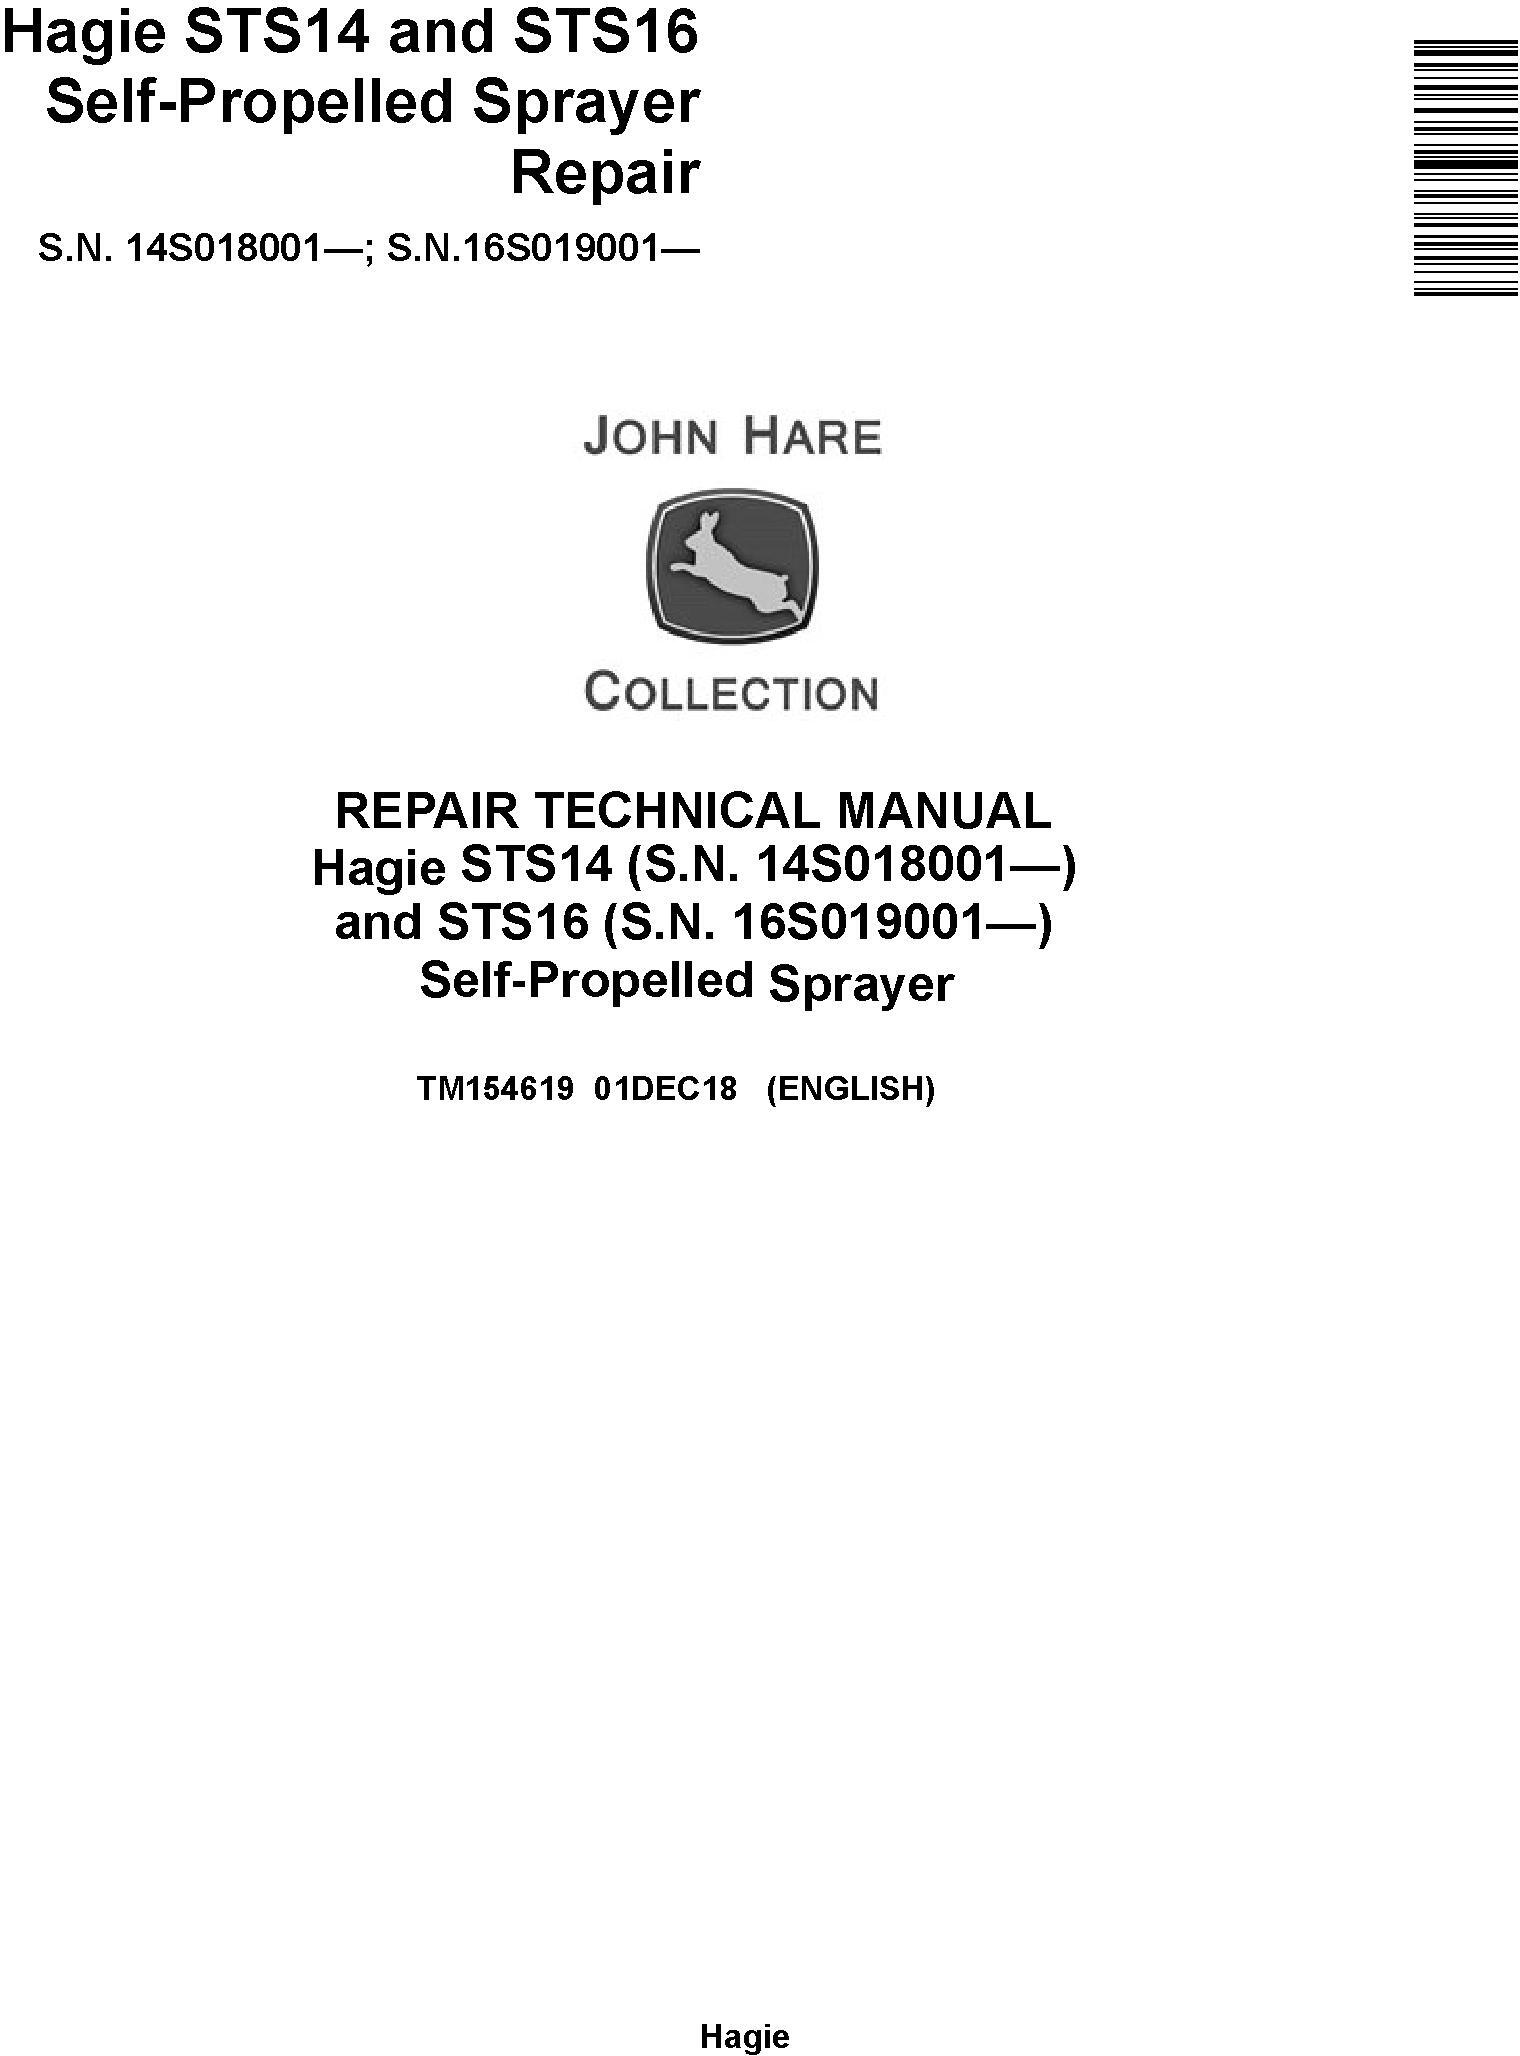 Hagie STS14 and STS16 Self-Propelled Sprayer Repair Technical Manual (TM154619) - 20139